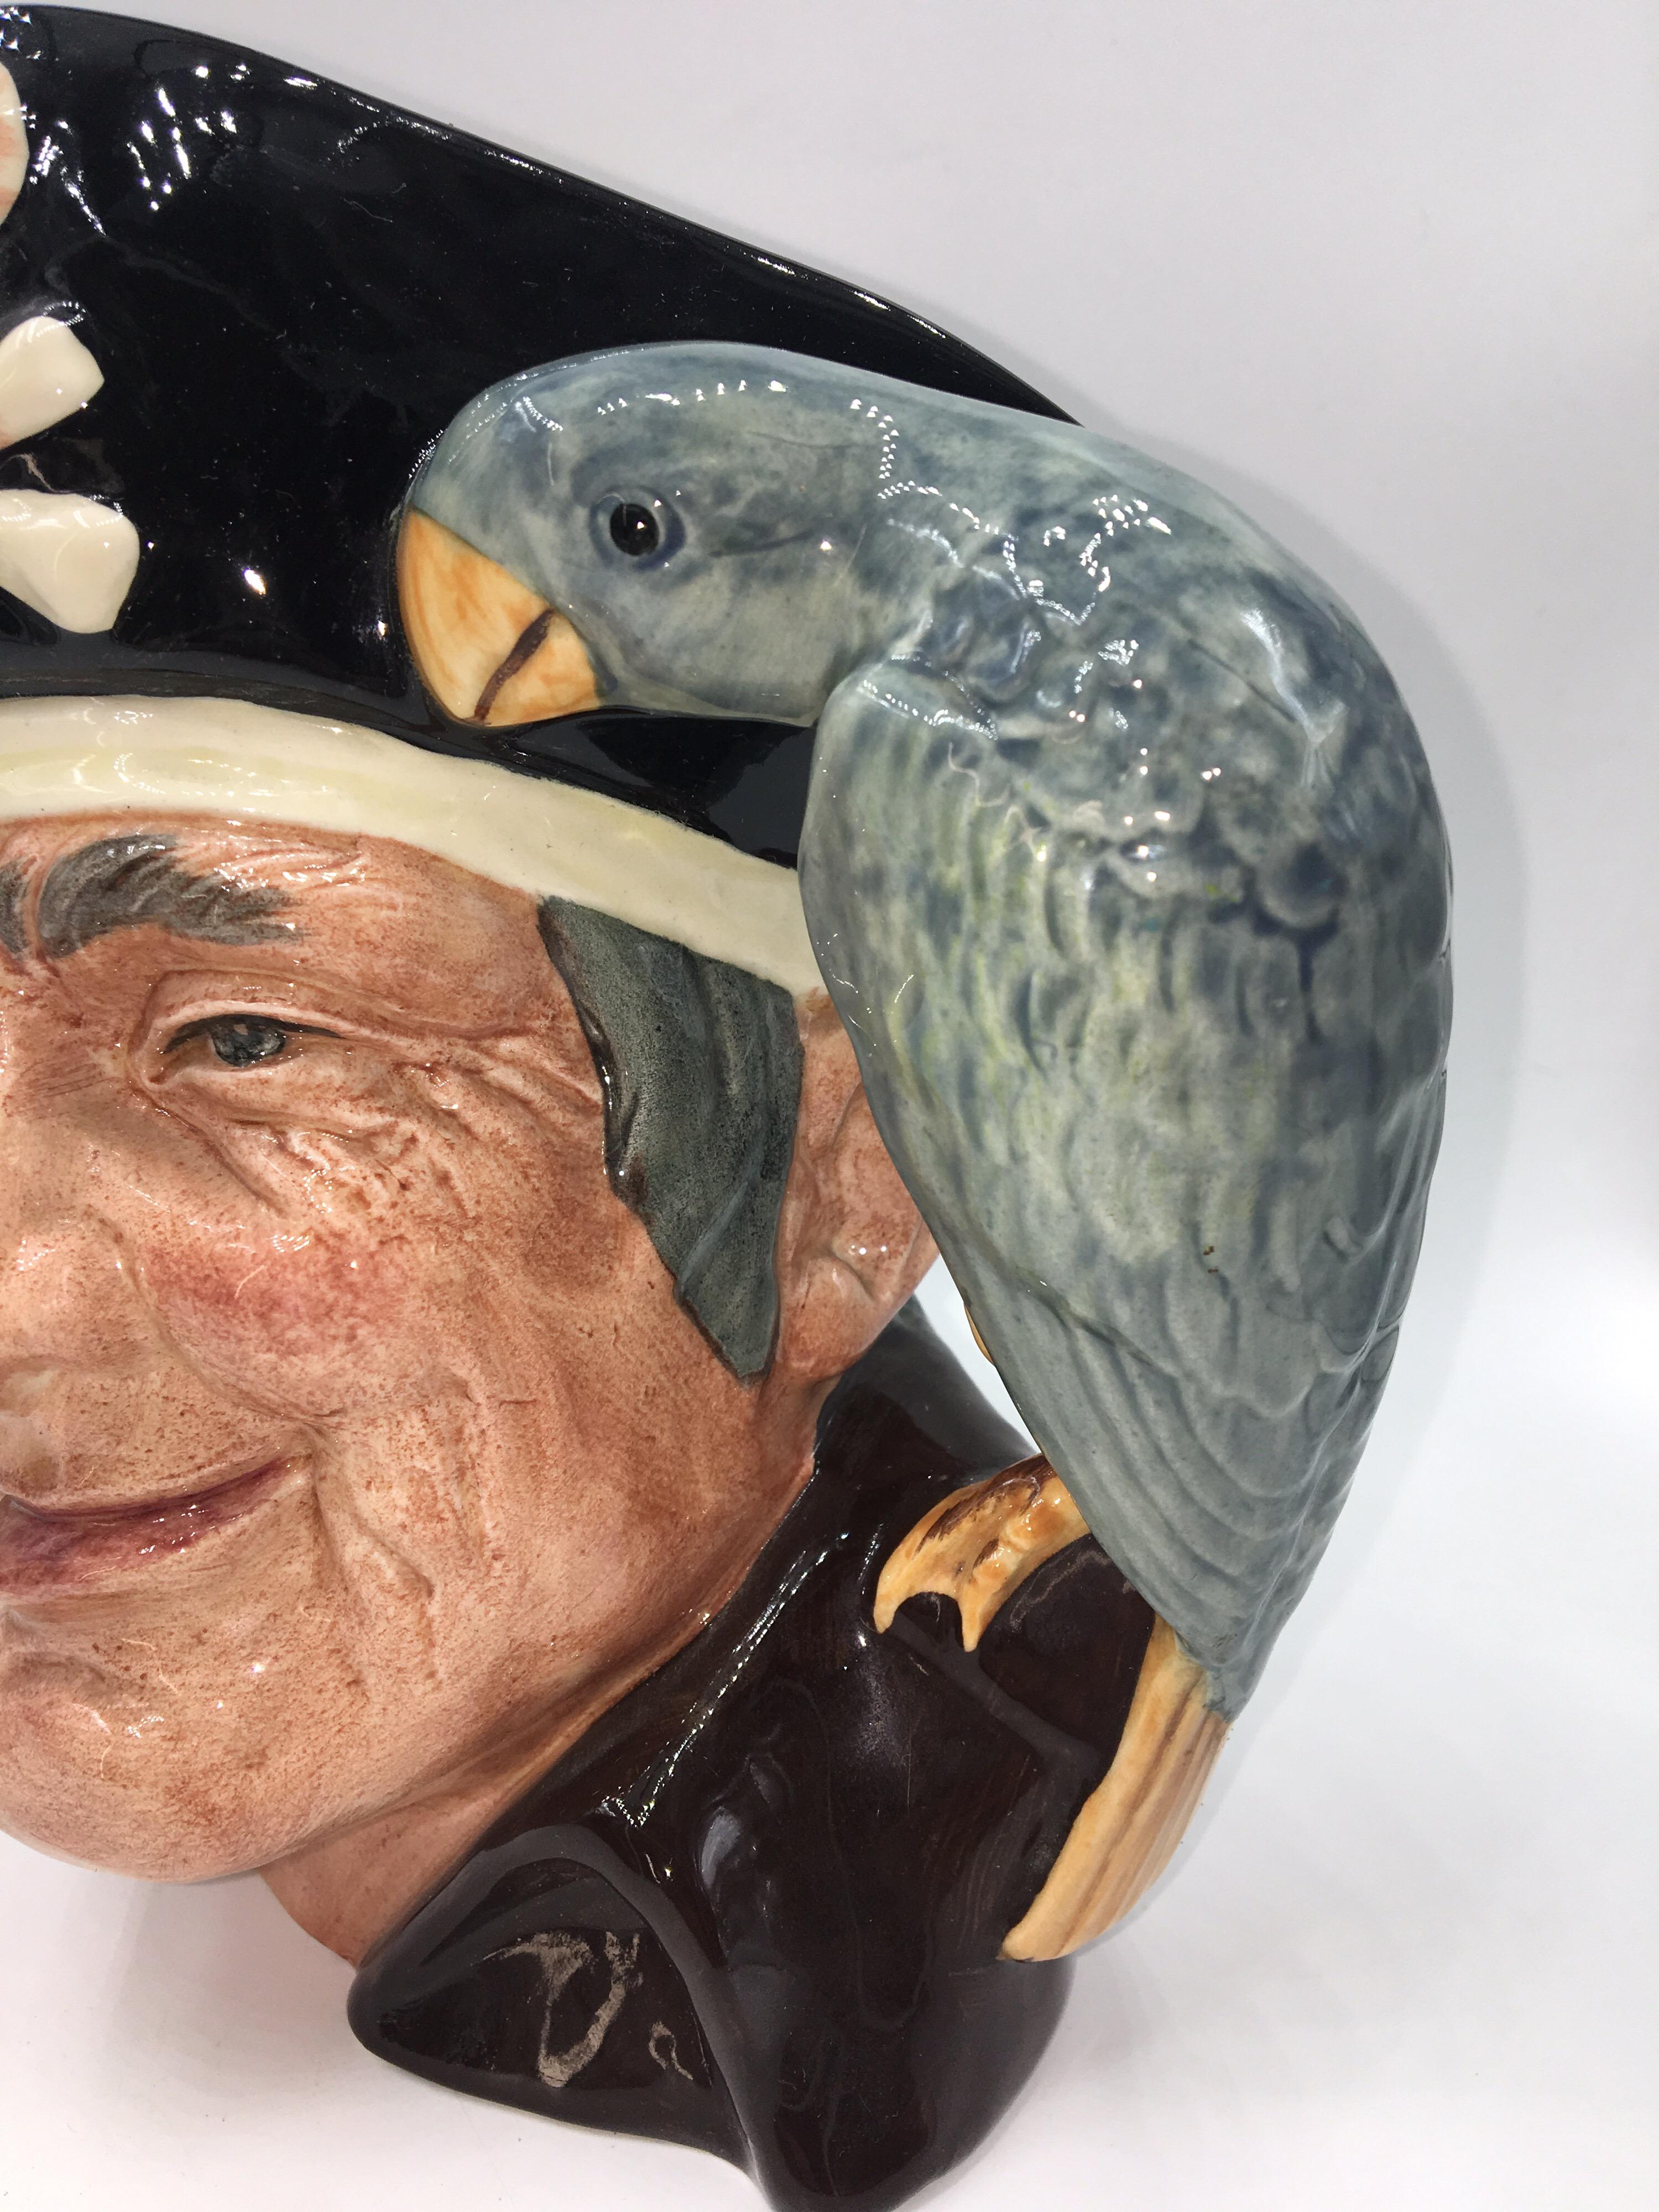 This is an offer of a really great Royal Doulton jug - this one of Long John Silver (and his parrot).
The underside stamps suggest this design is from their 'Characters From Literature' series and this design is by Max Henk.
D6335 1951 porcelain